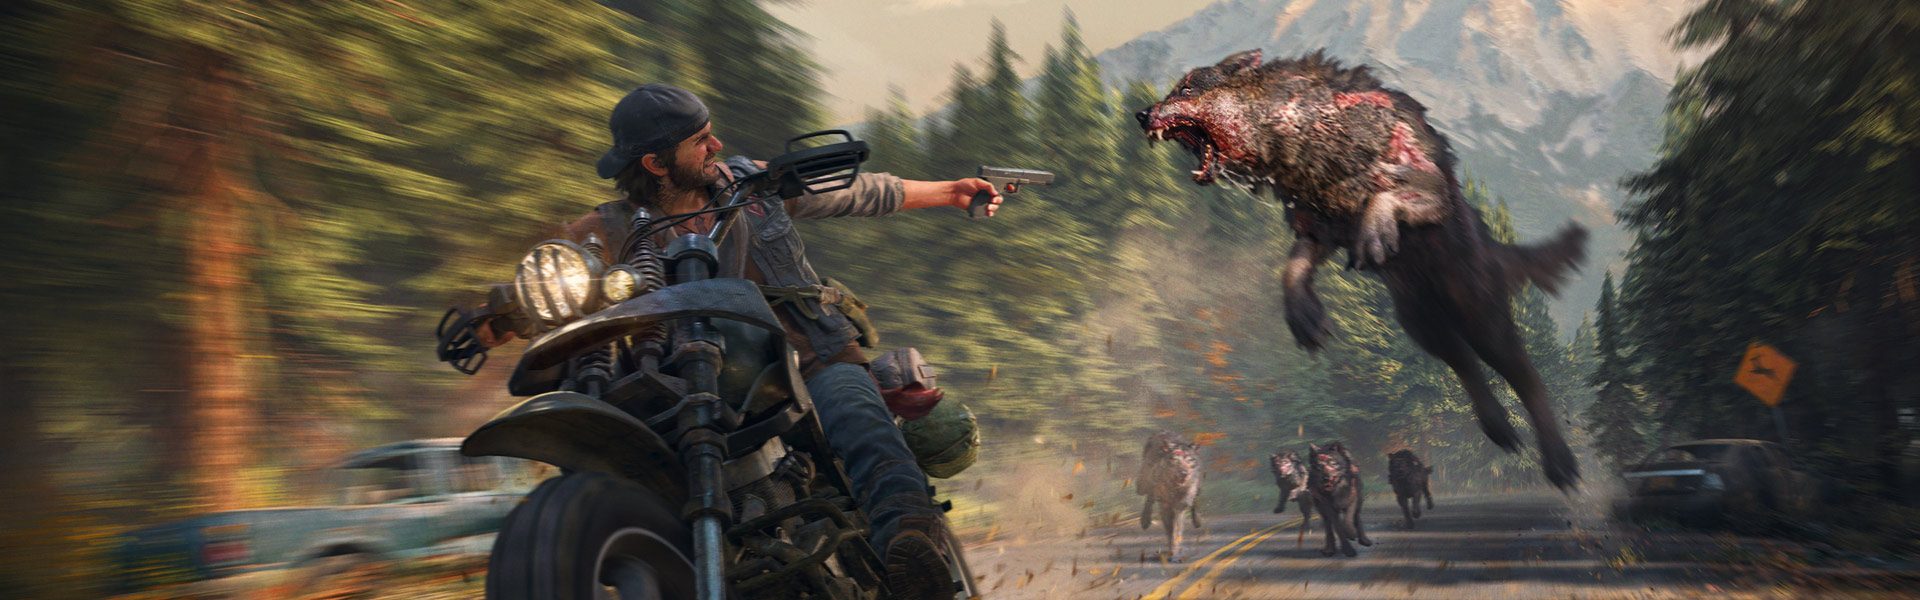 days gone ps4 ps store